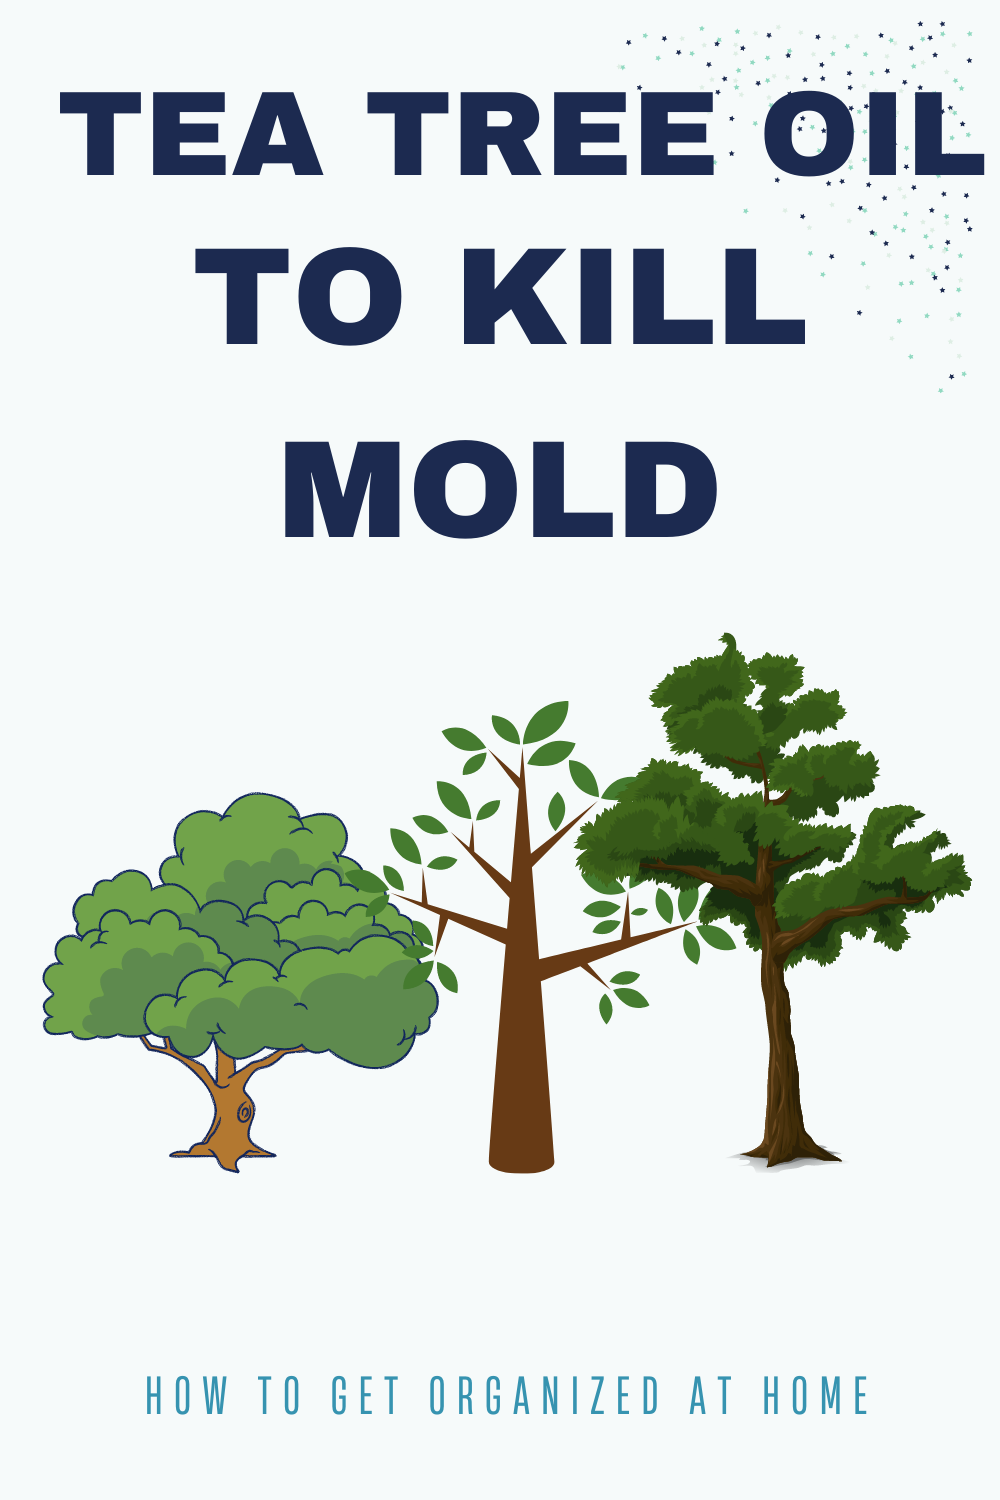 Are You Using Tea Tree Oil On Mold?